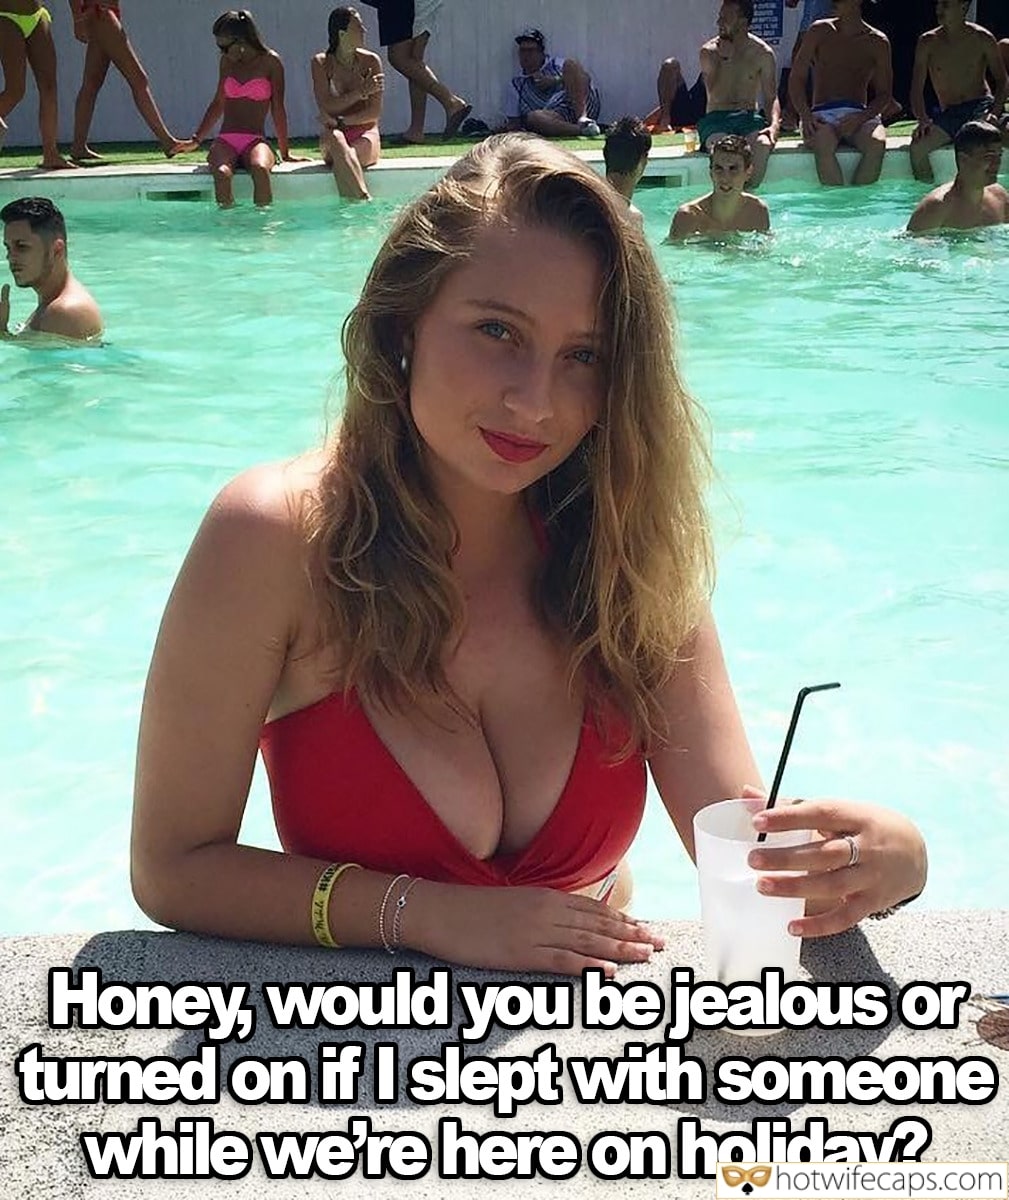 Wife Sharing Vacation Sexy Memes Cuckold Cleanup Cheating hotwife caption: Honey, would you be jealous or turned on if I slept with someone while we’re here on holiday? Little Wife in a Red Swimsuit on Vacation